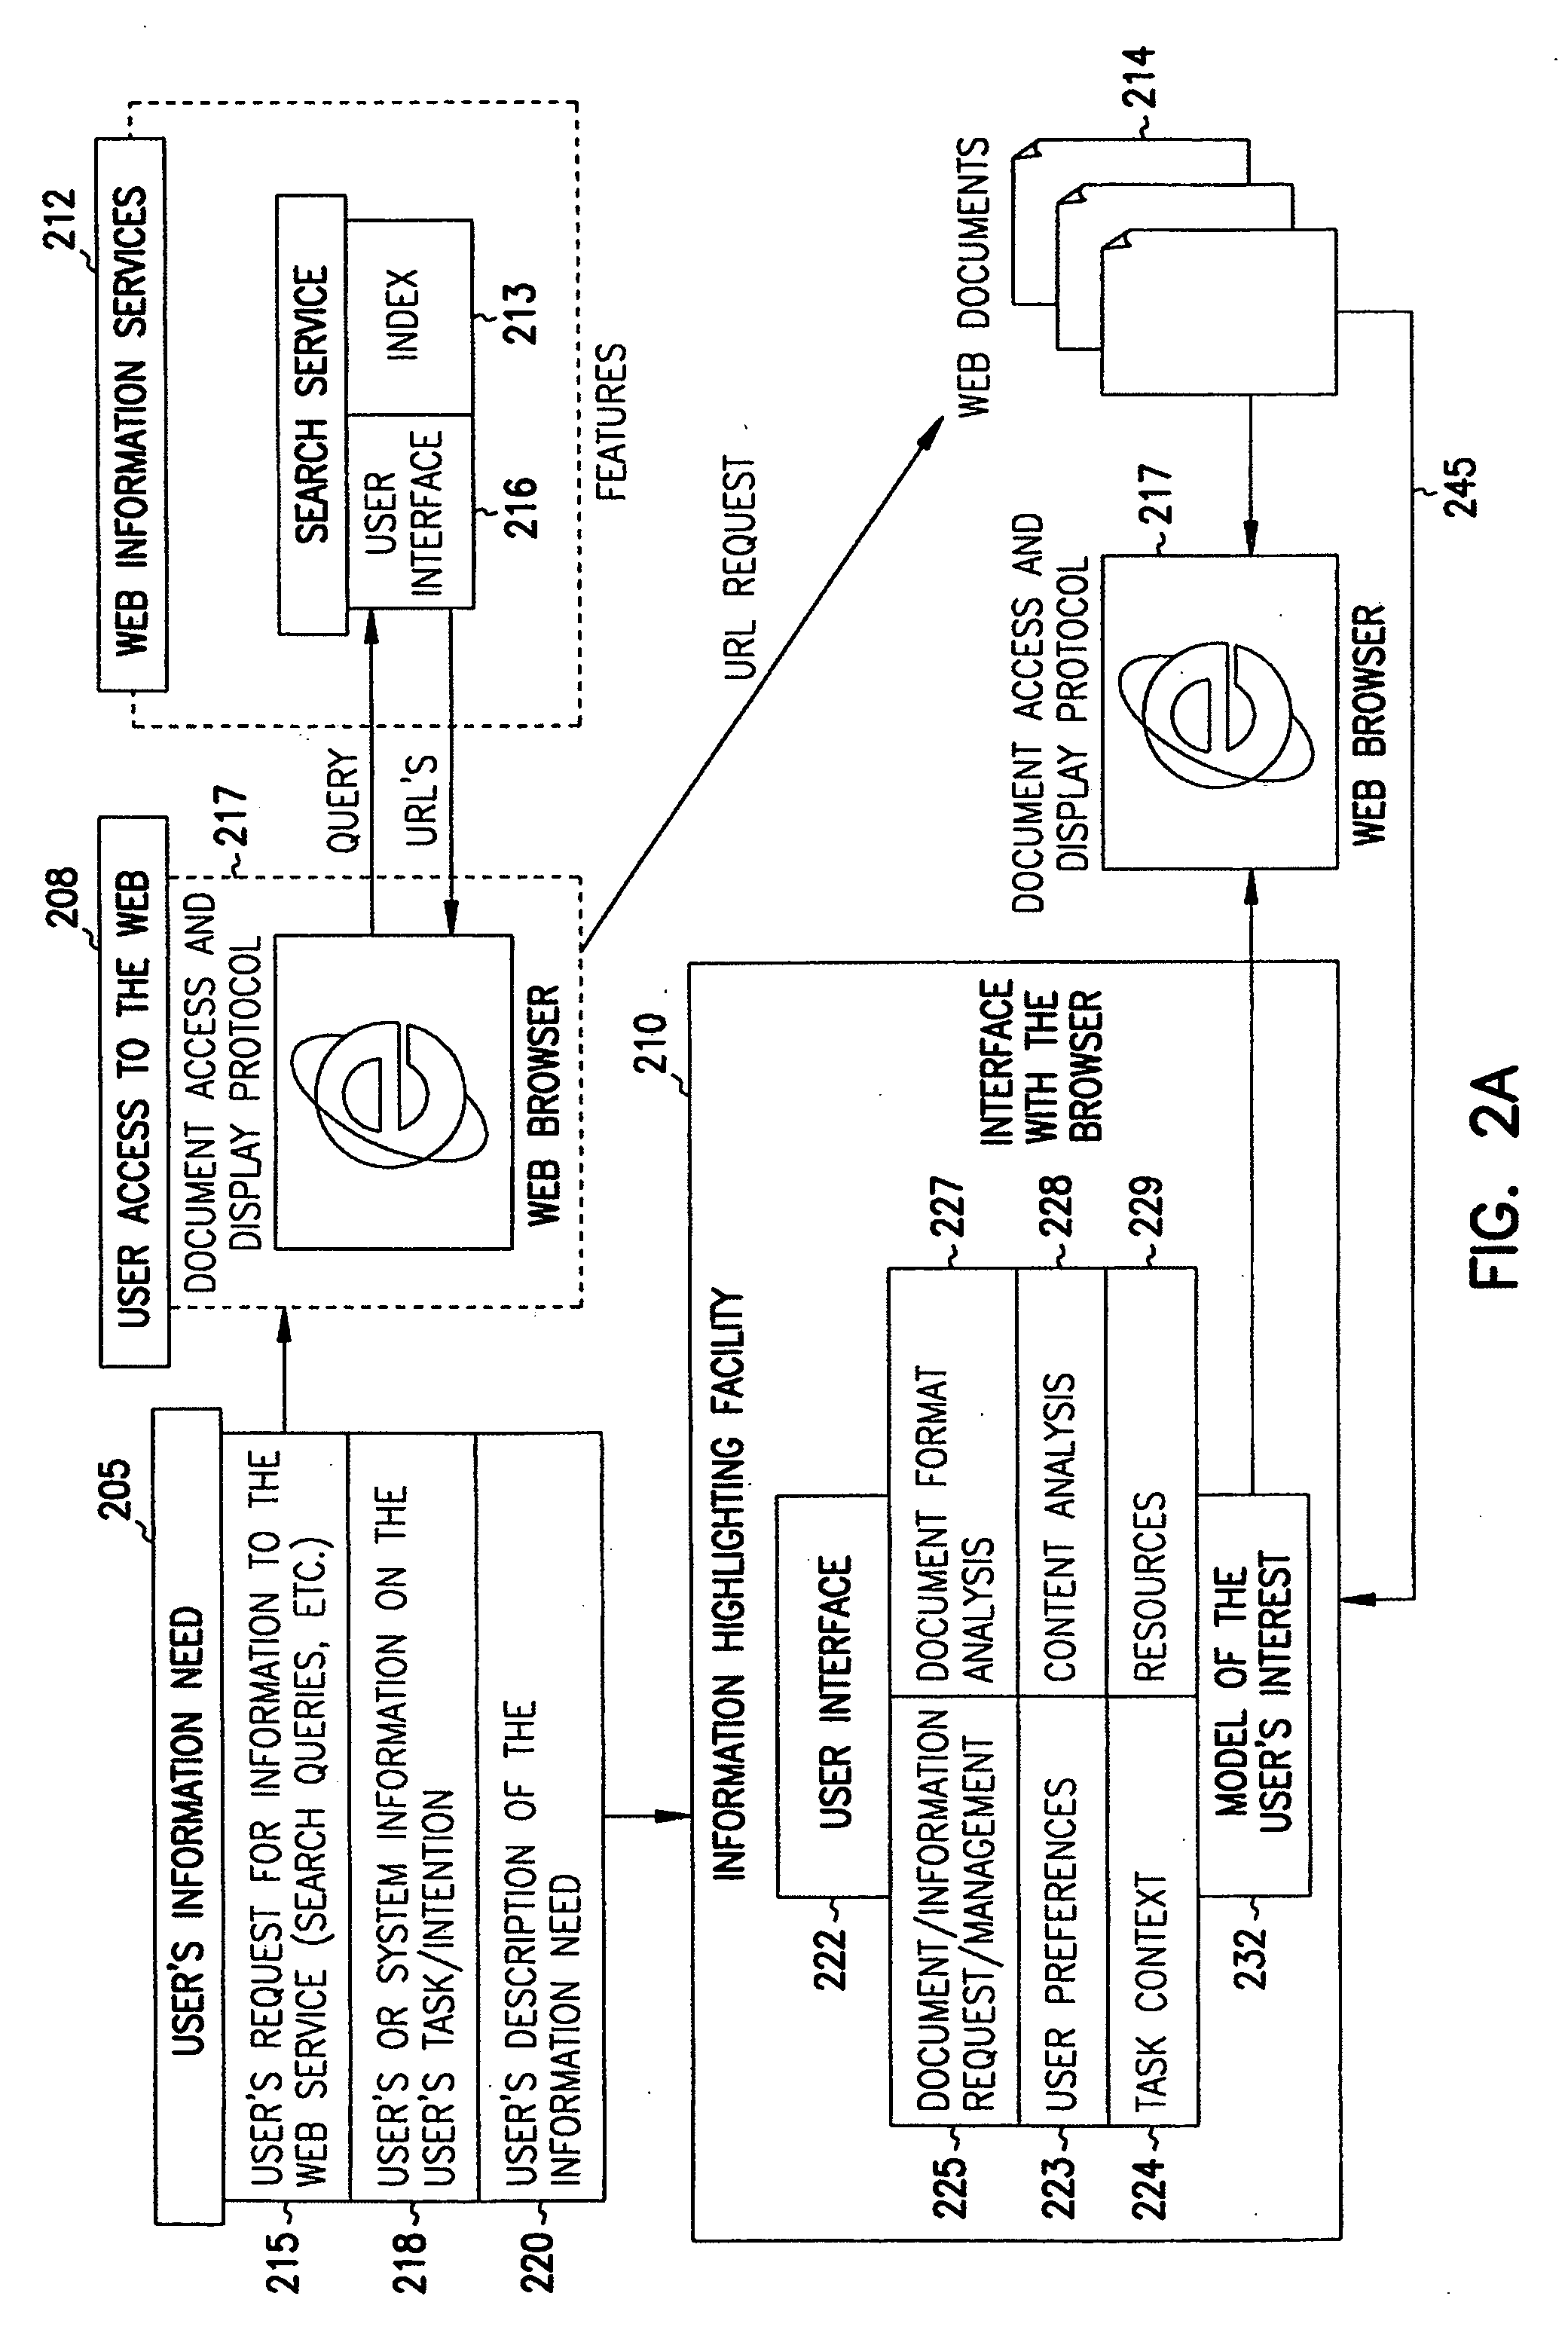 Facility for highlighting documents accessed through search or browsing